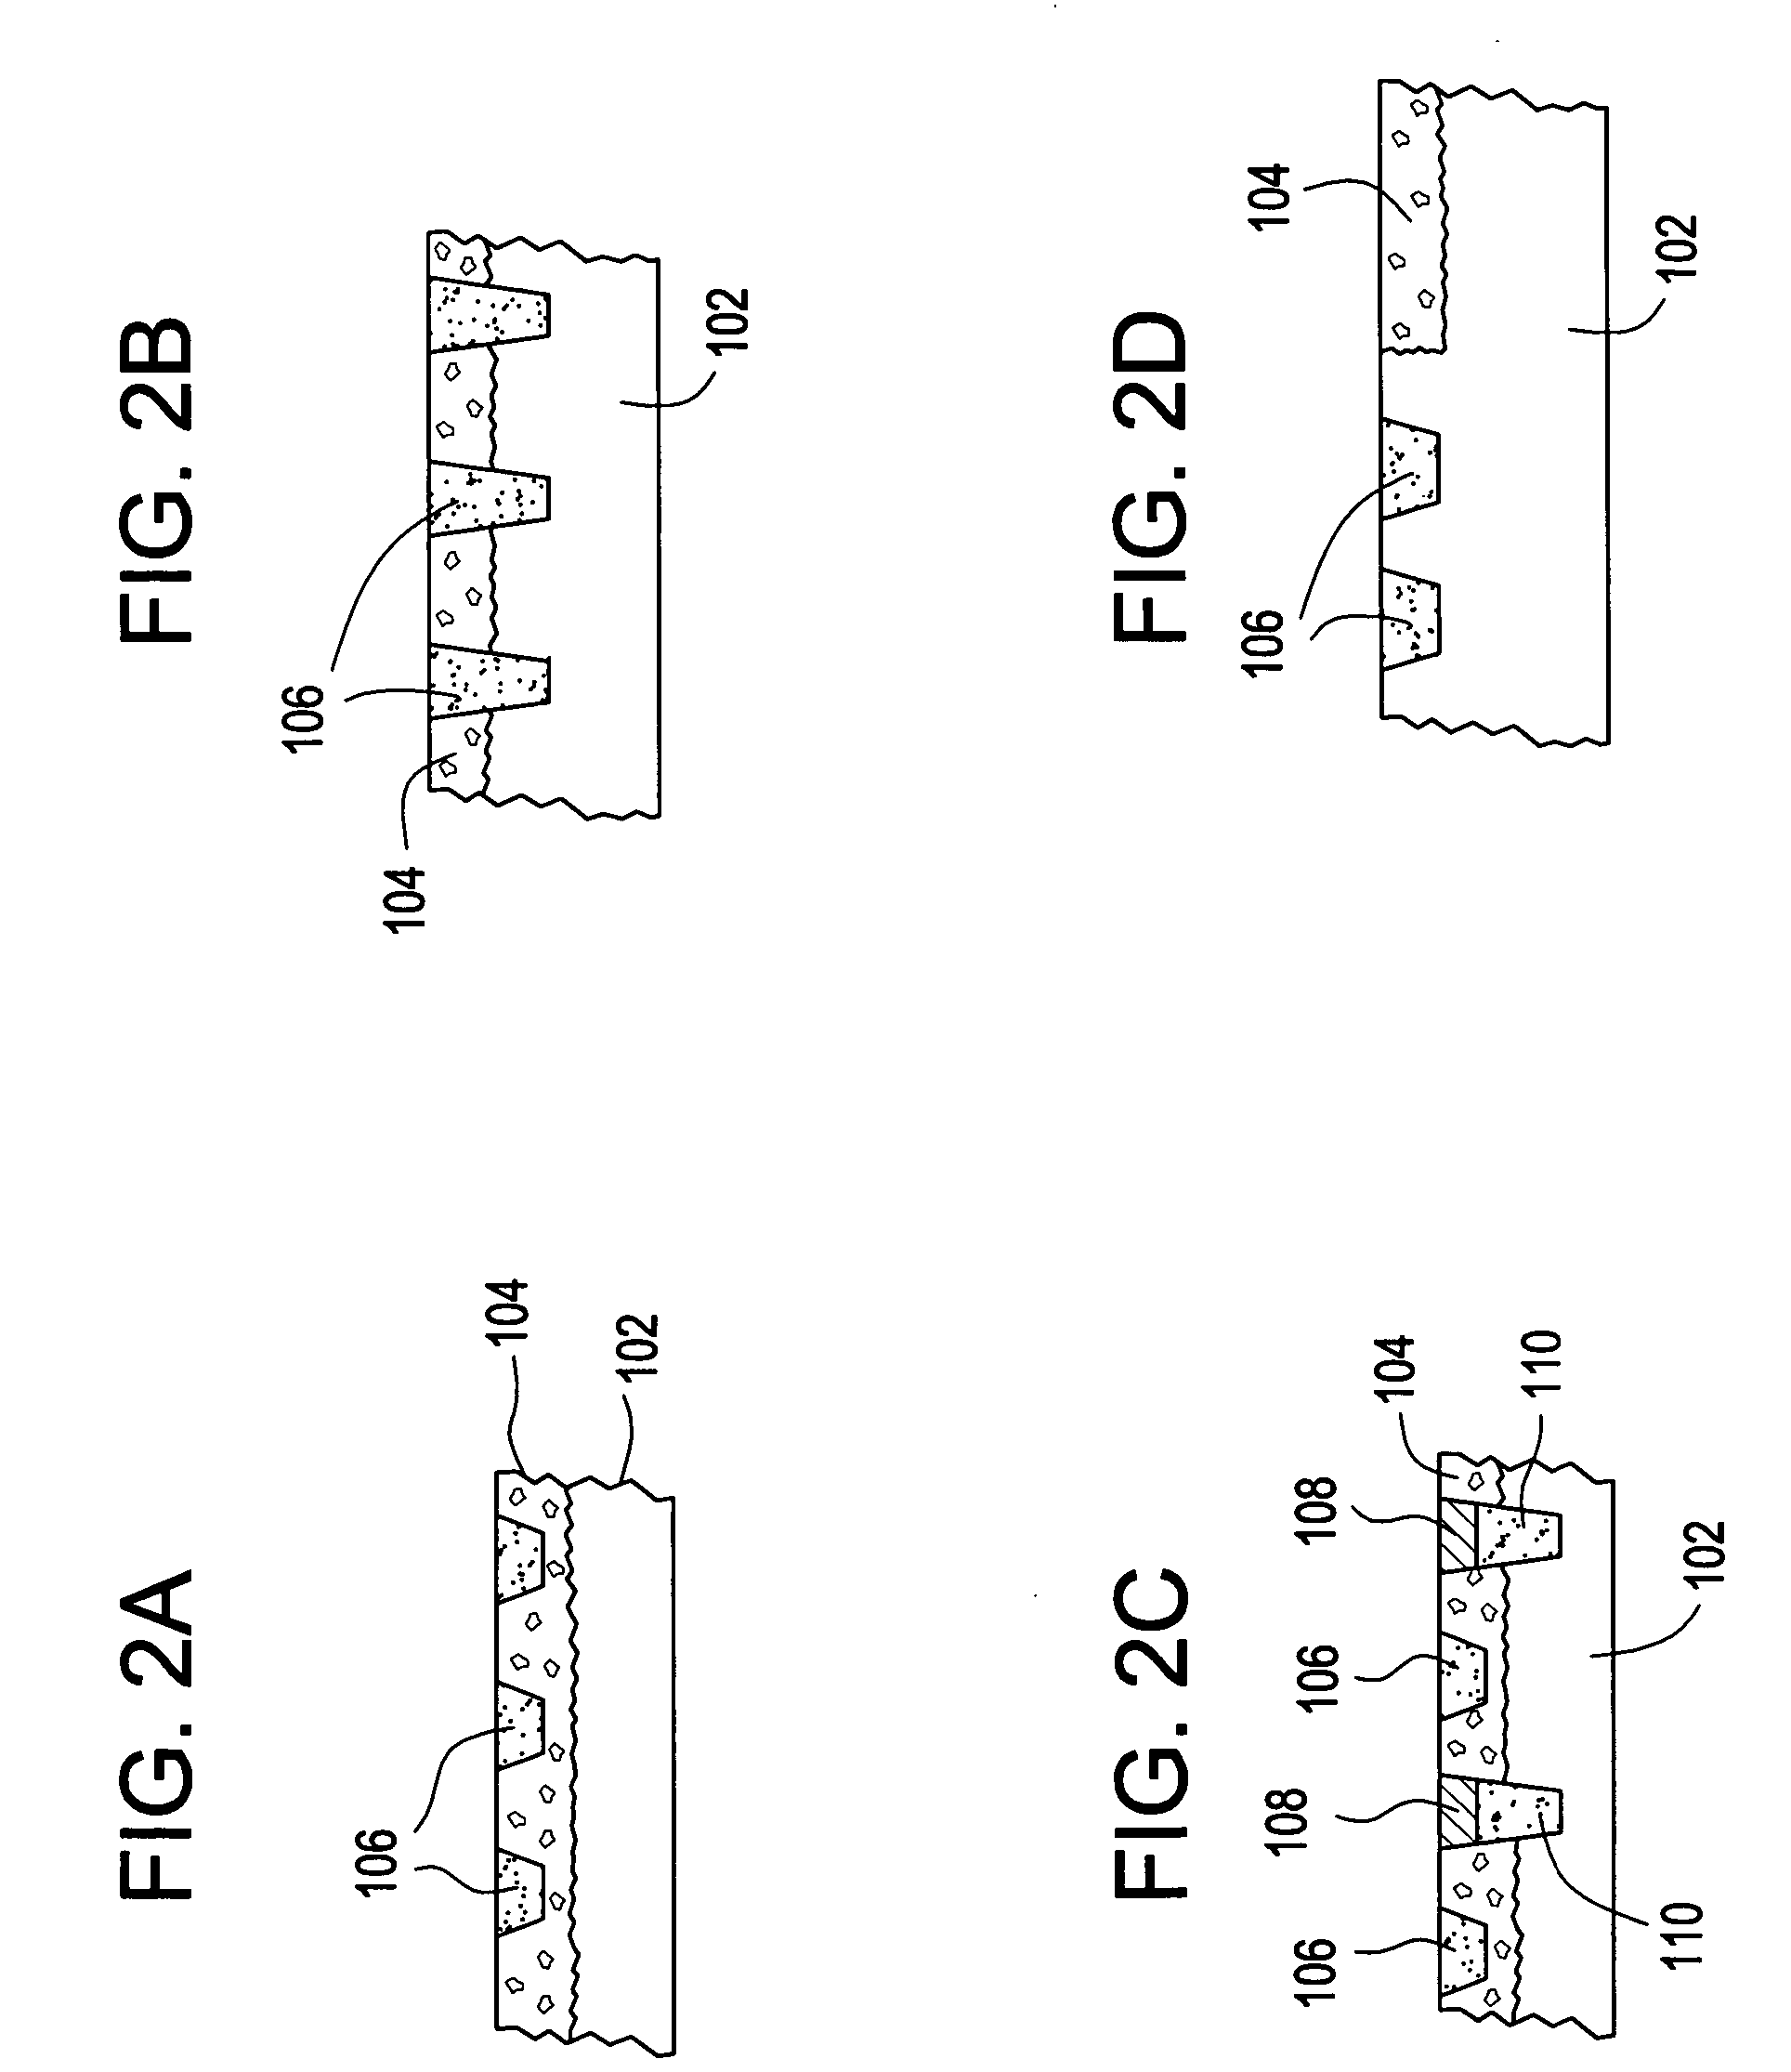 Orthopedic and dental implant devices providing controlled drug delivery